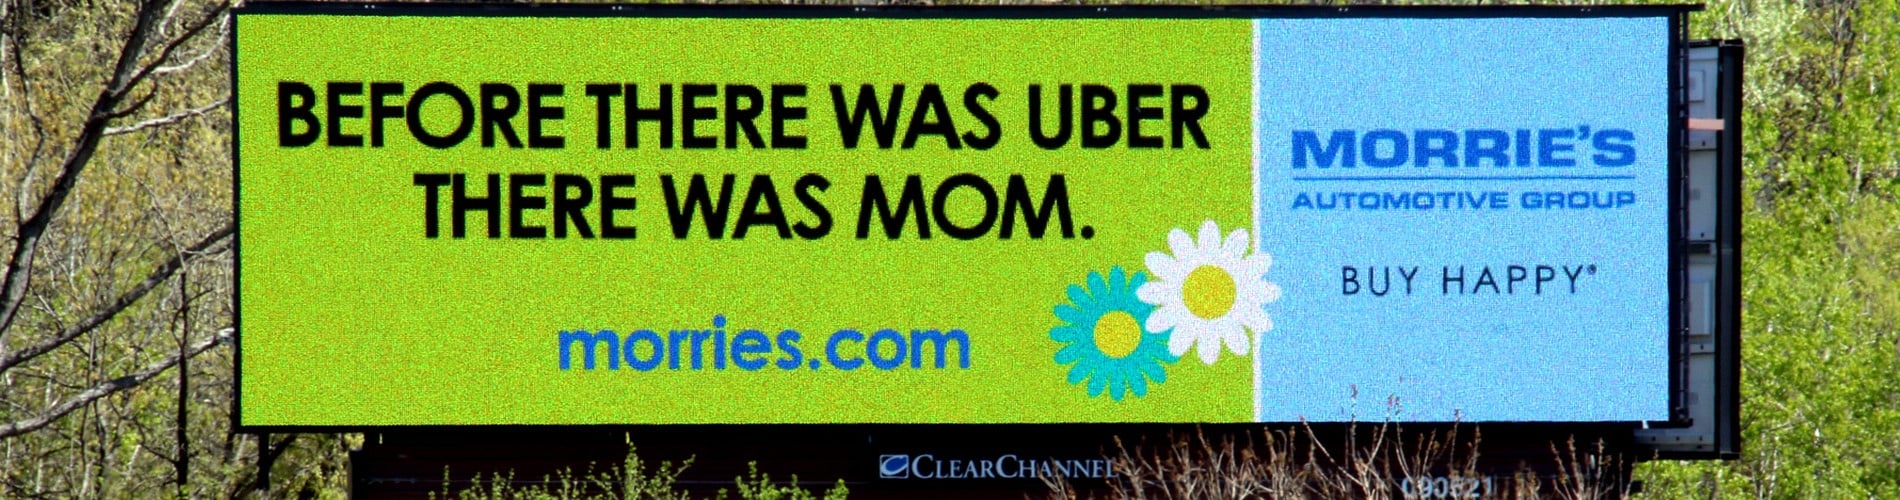 Morrie's Before Uber There was Mom Billboard